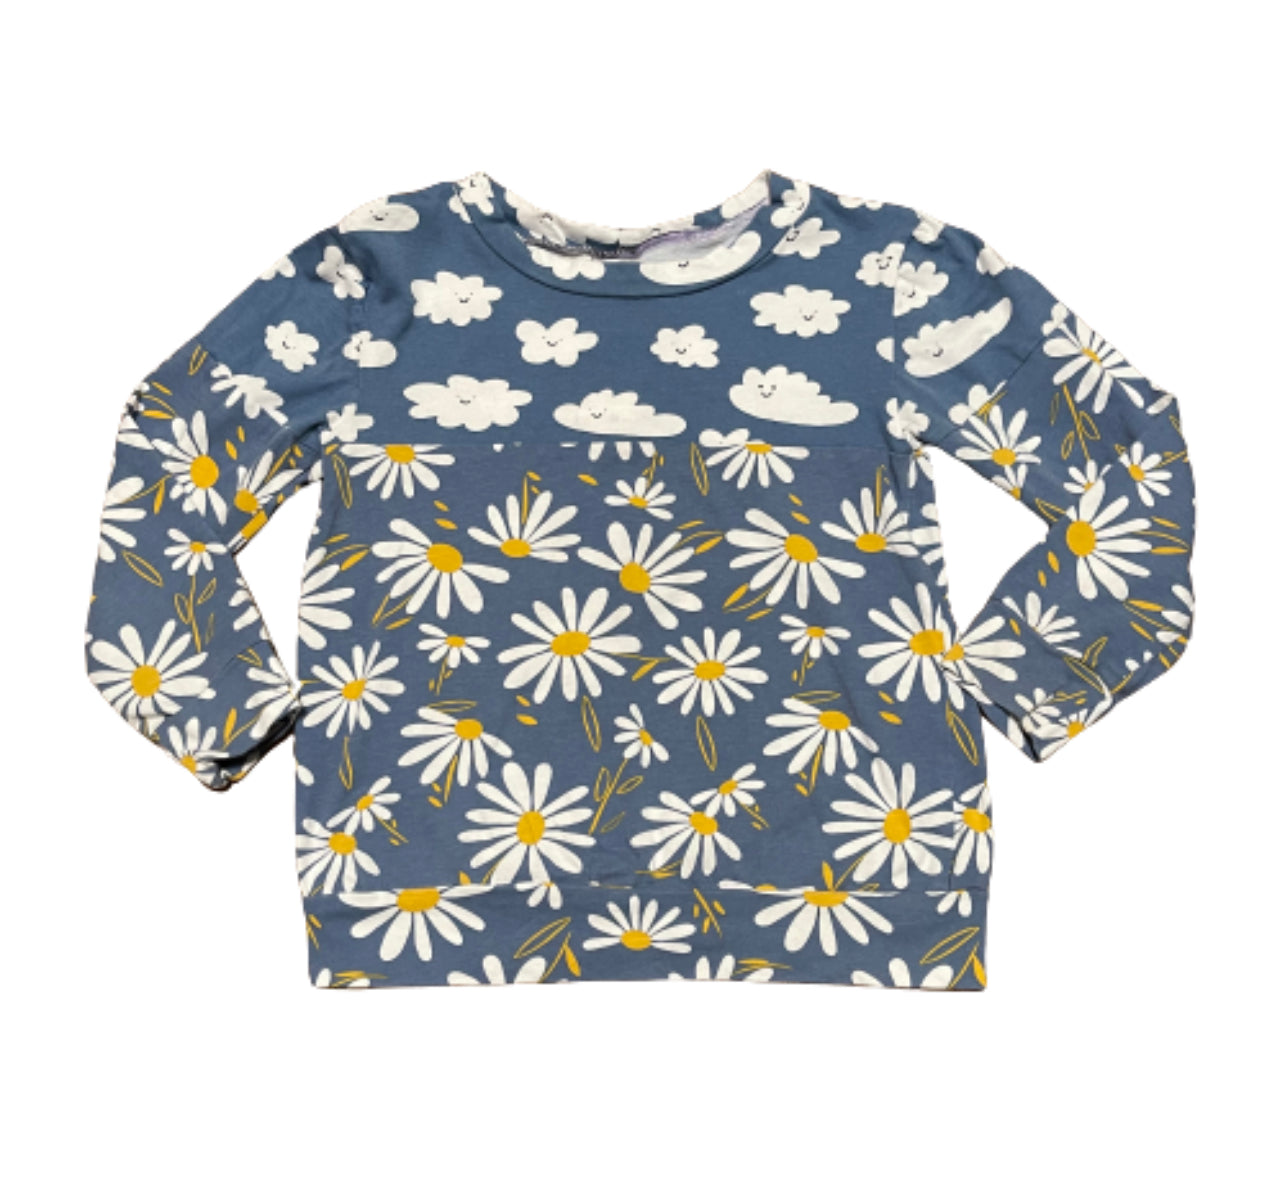 April Showers Bring May Flowers - Lounge Top - 3T